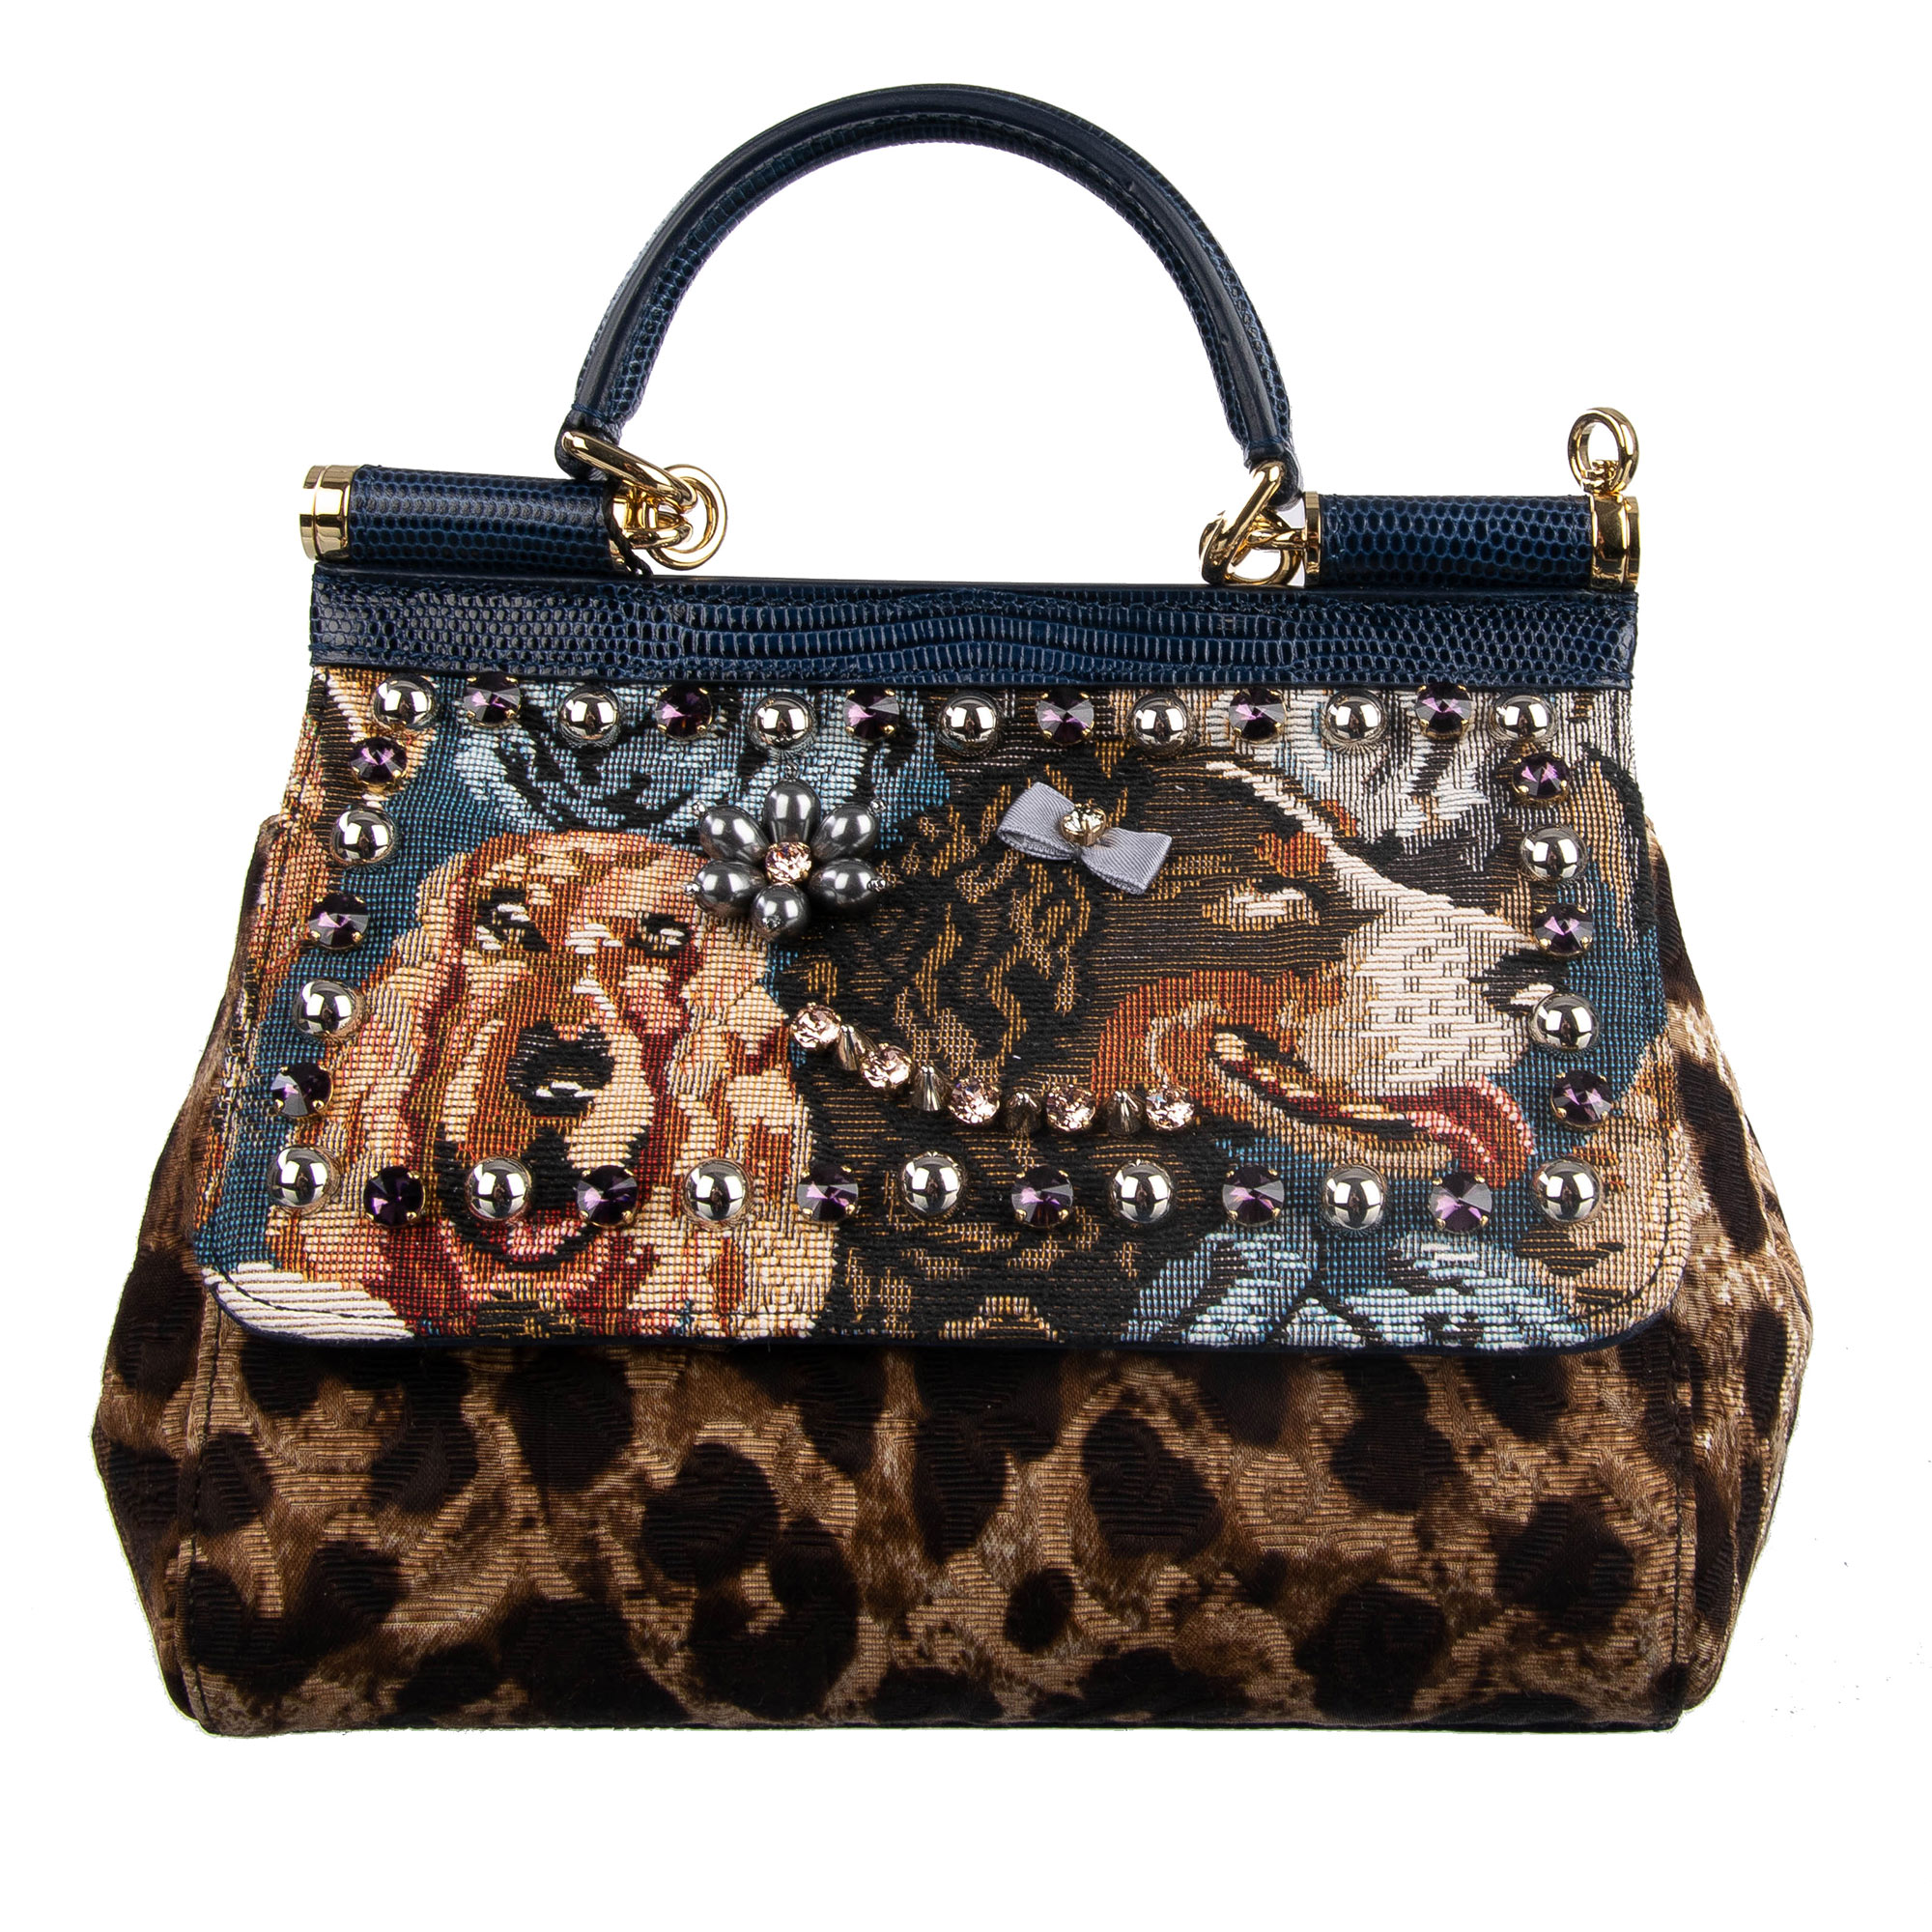 Dolce & Gabbana Embroidered Bag SICILY Leopard Brown | FASHION ROOMS